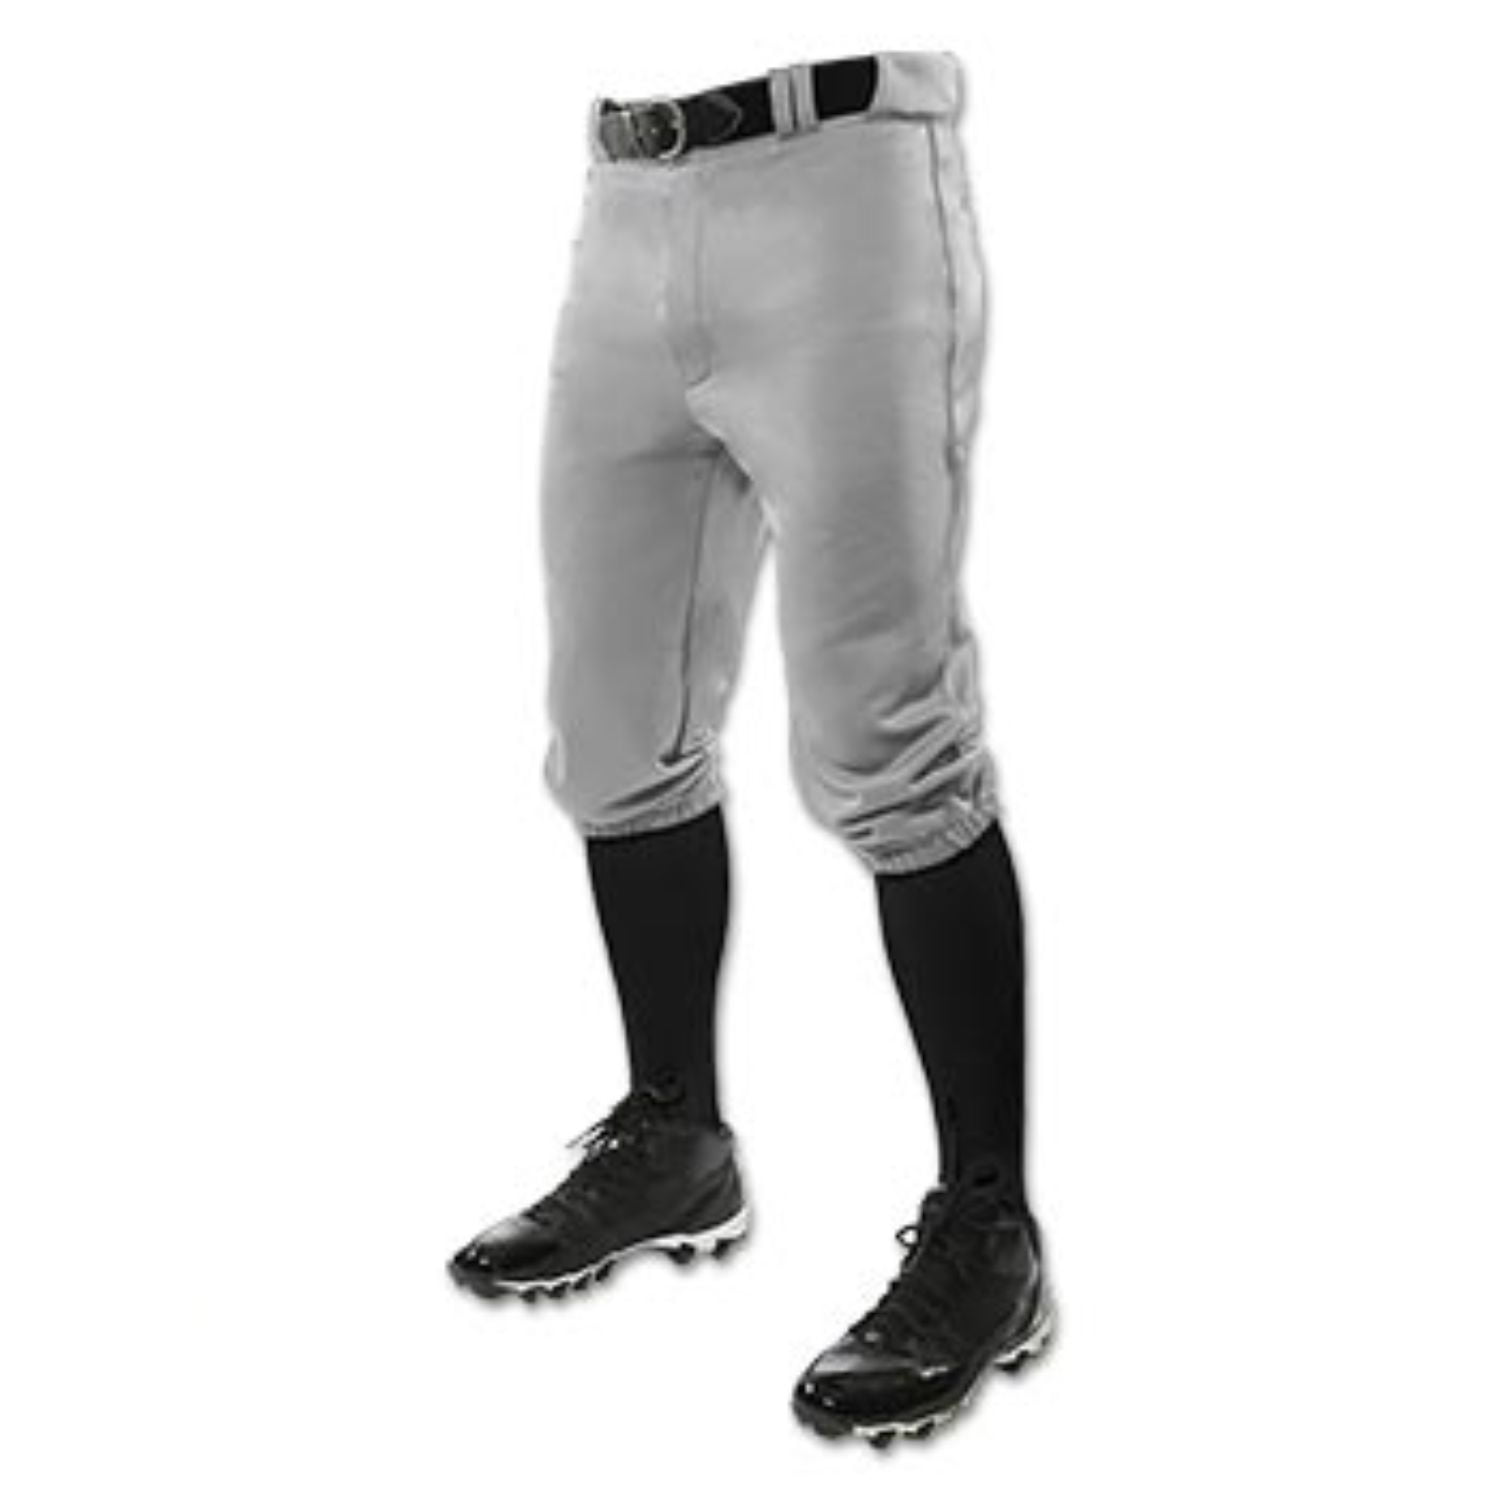 Easton Women's Prowess Piped Fastpitch Pant WHITENAVY 2XL 